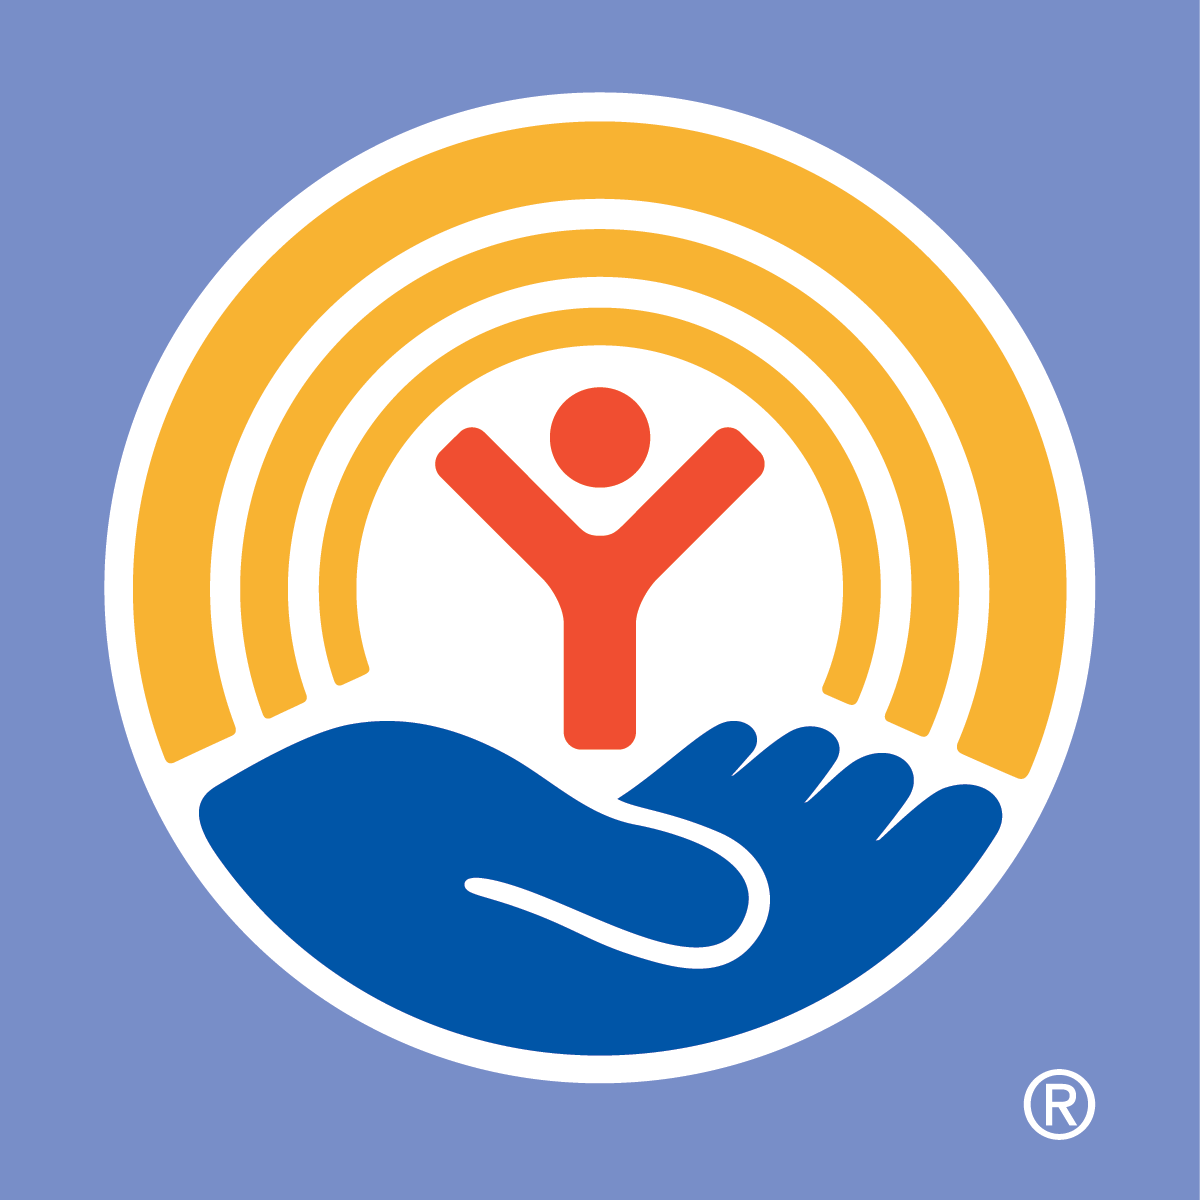 United Way of Ottawa and Allegan Counties